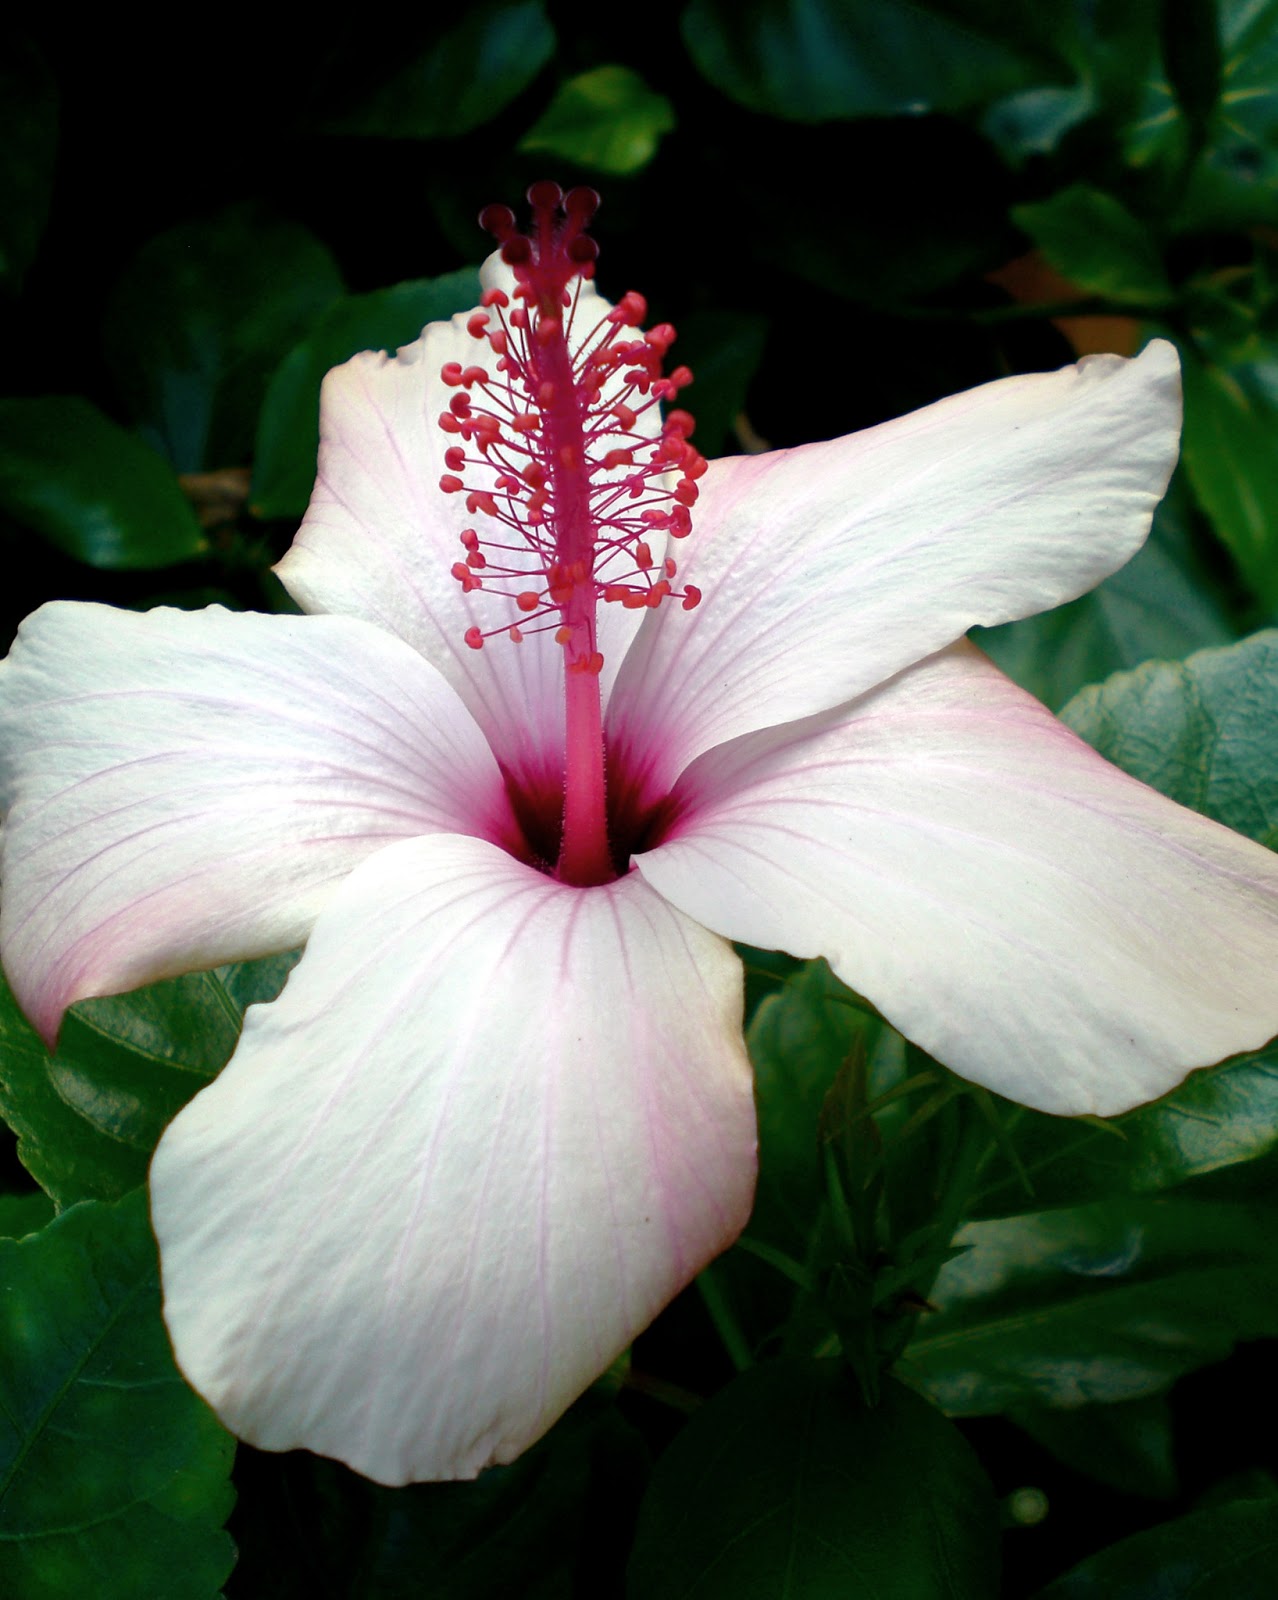 Exotic tropical flowers photos - Just for Sharing